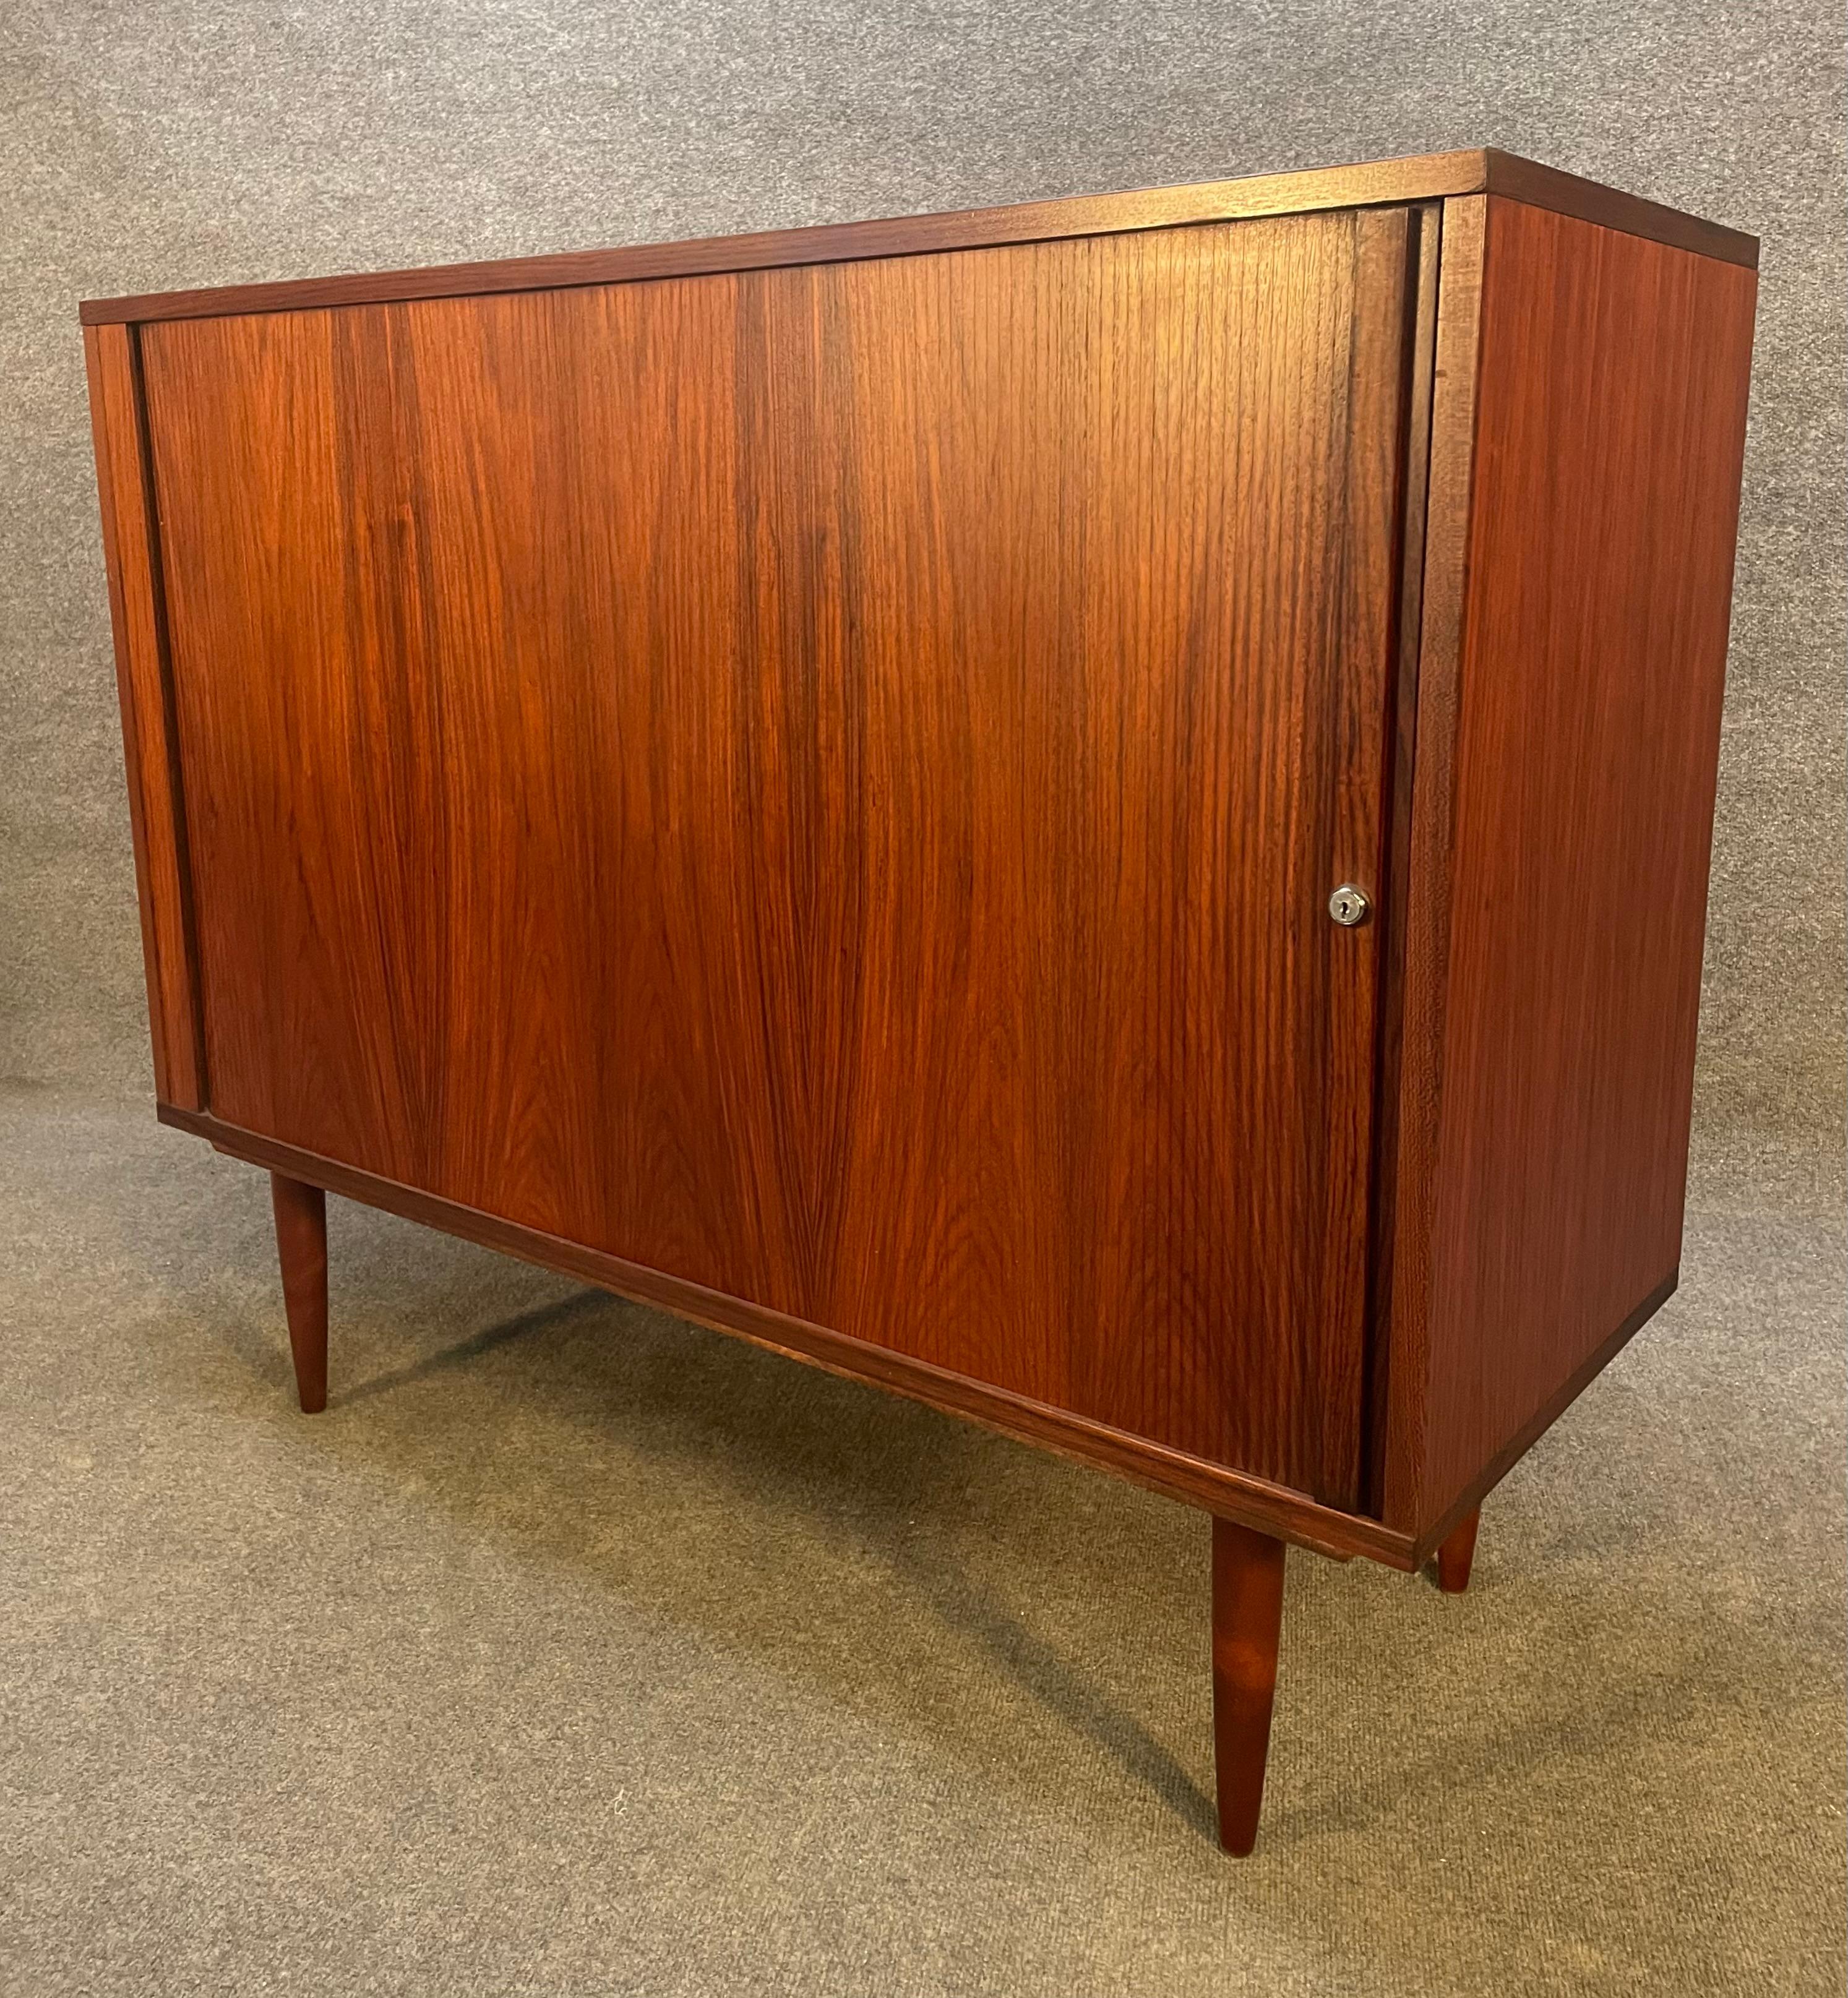 Here is a beautiful Scandinavian Modern cabinet in Brazilian rosewood designed by Marius Byrialsen and manufactured by Nipu Mobler in Denmark in the 1970s.
This exquisite case piece, recently imported from Europe to California before its